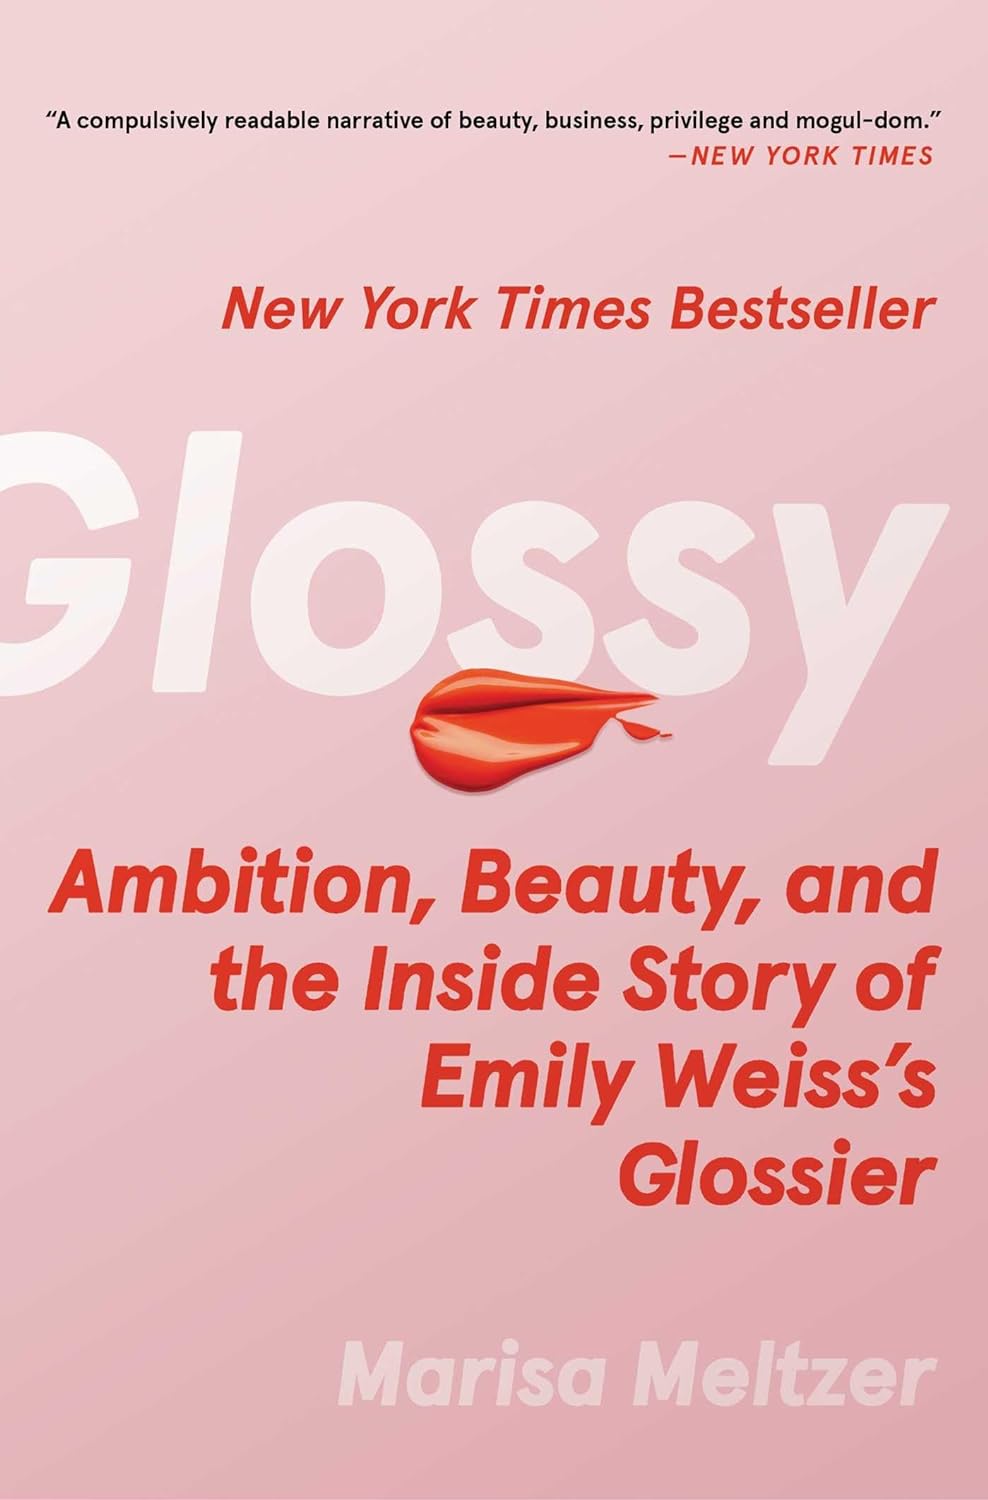 4 Key Marketing Lessons Beauty Brands Can Learn from Glossier